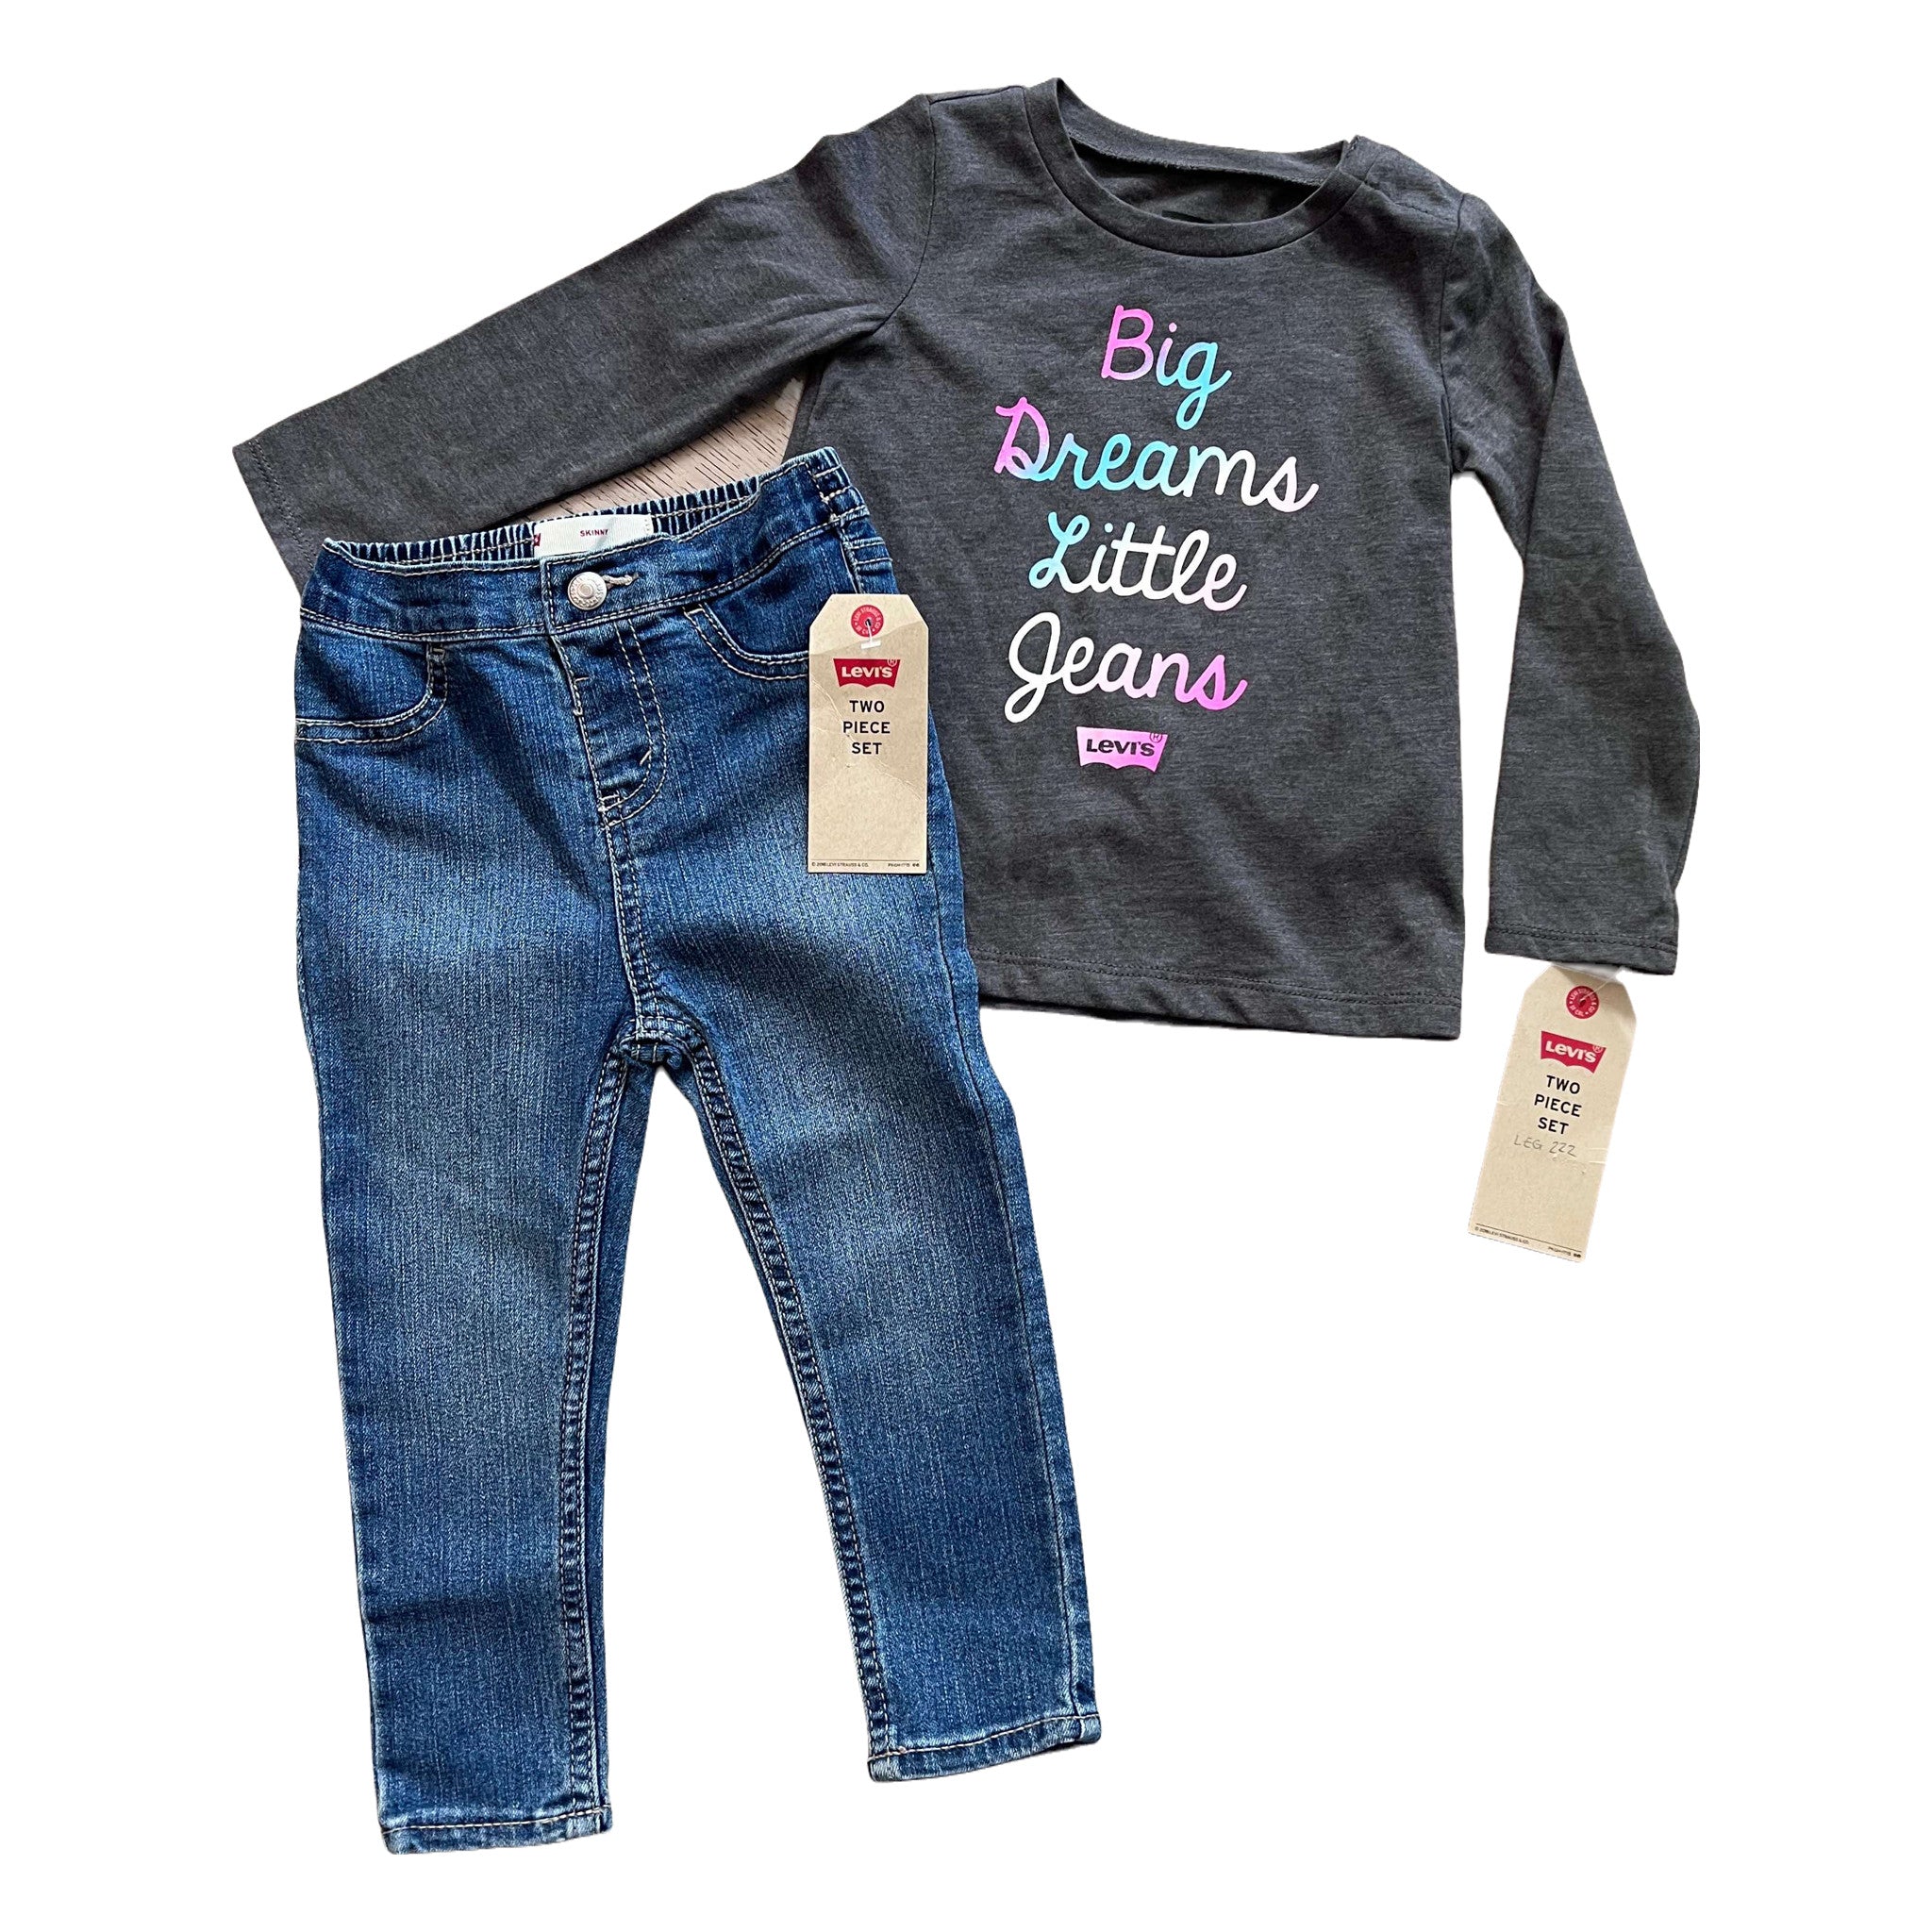 Levi's Printed Tee and Jeans Set – Secondbrand